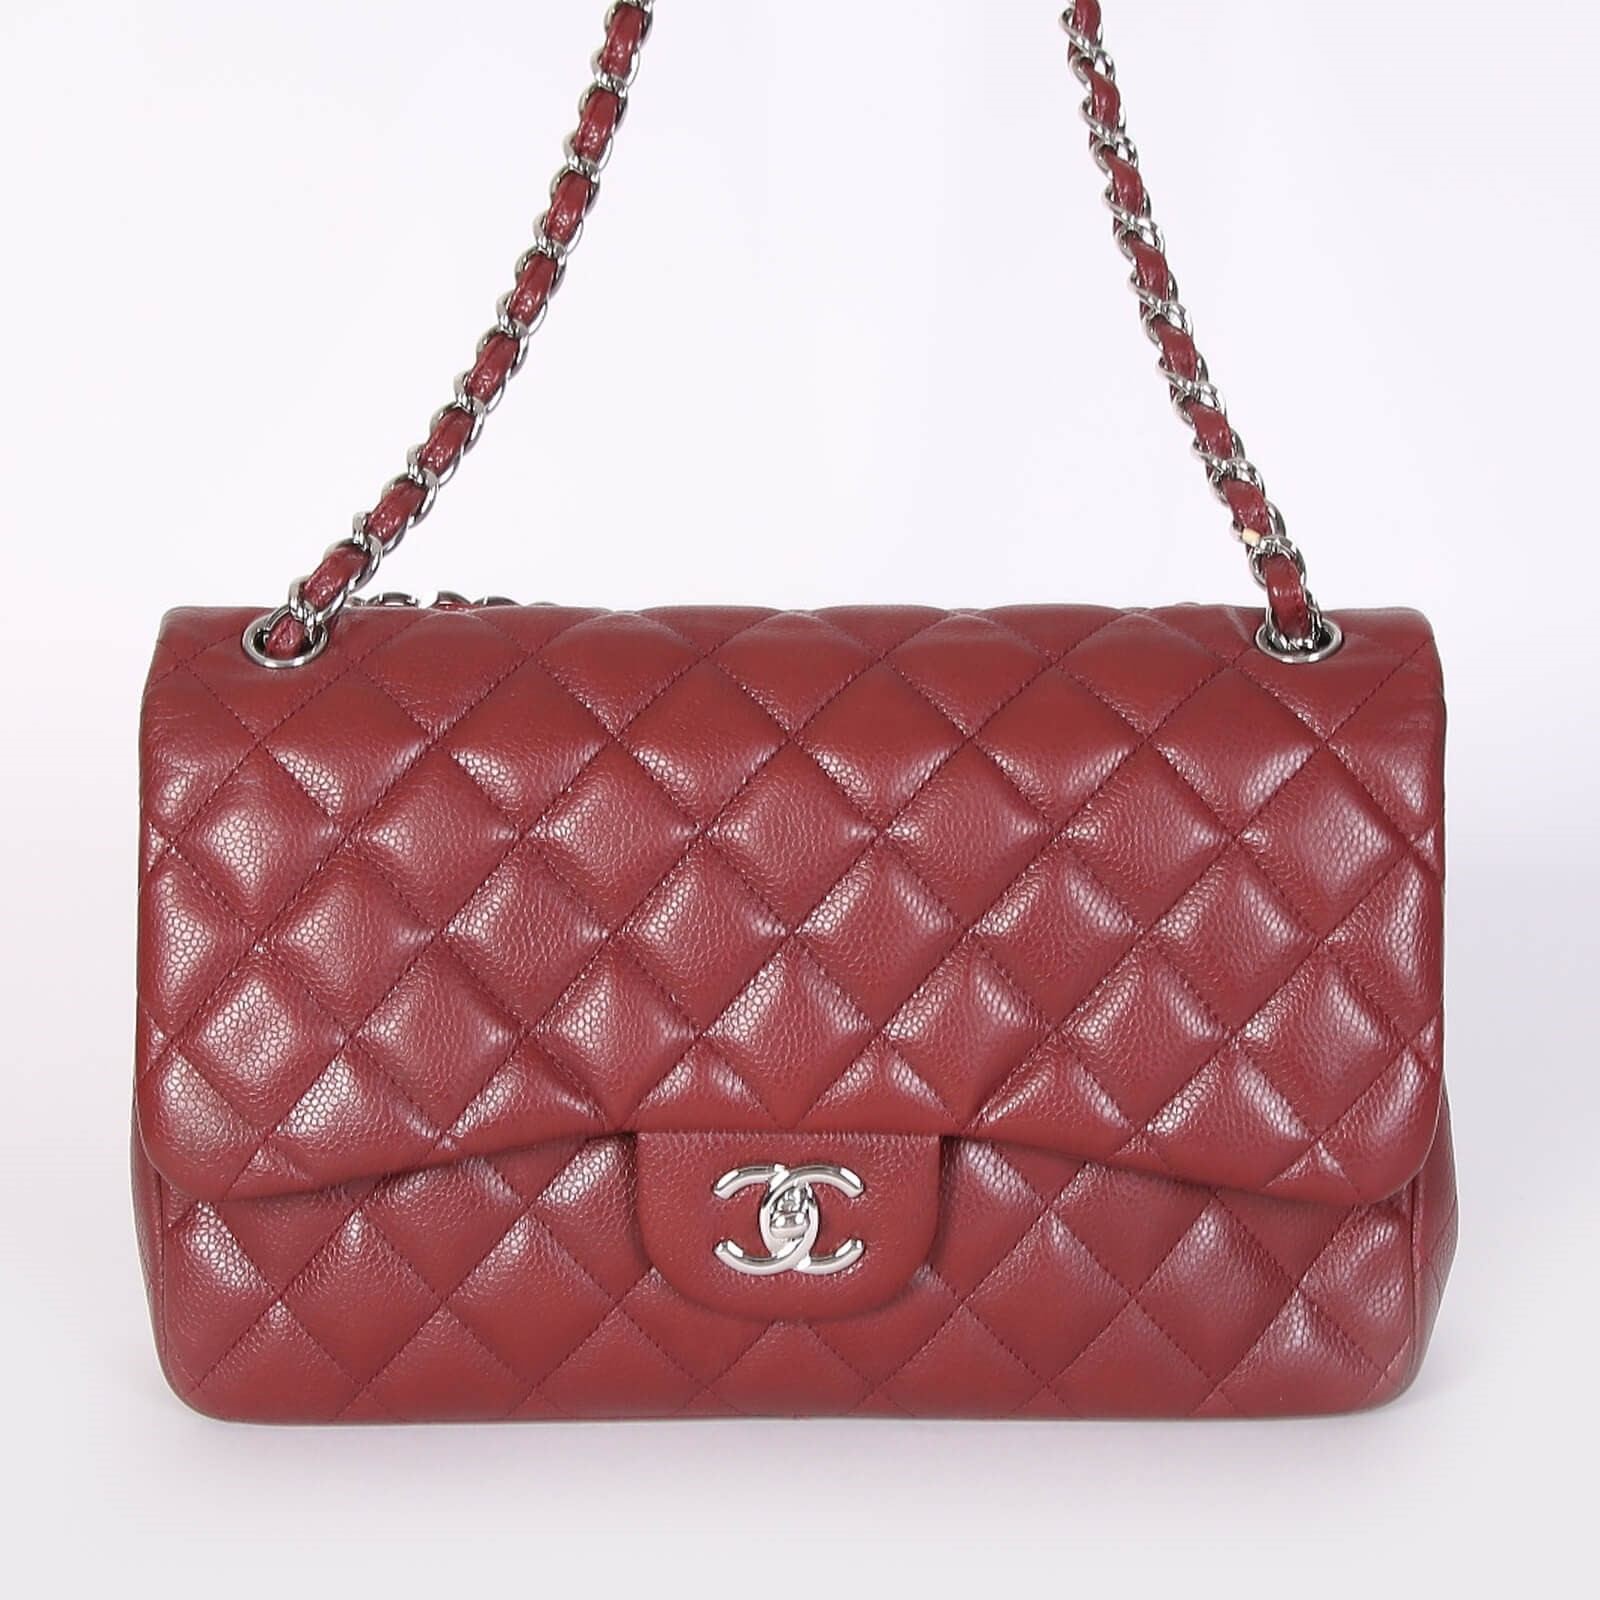 CHANEL | Bags | Chanel Vintage Cc Red Classic Flap Quilted Mini Square  Matelasse Bag | Poshmark